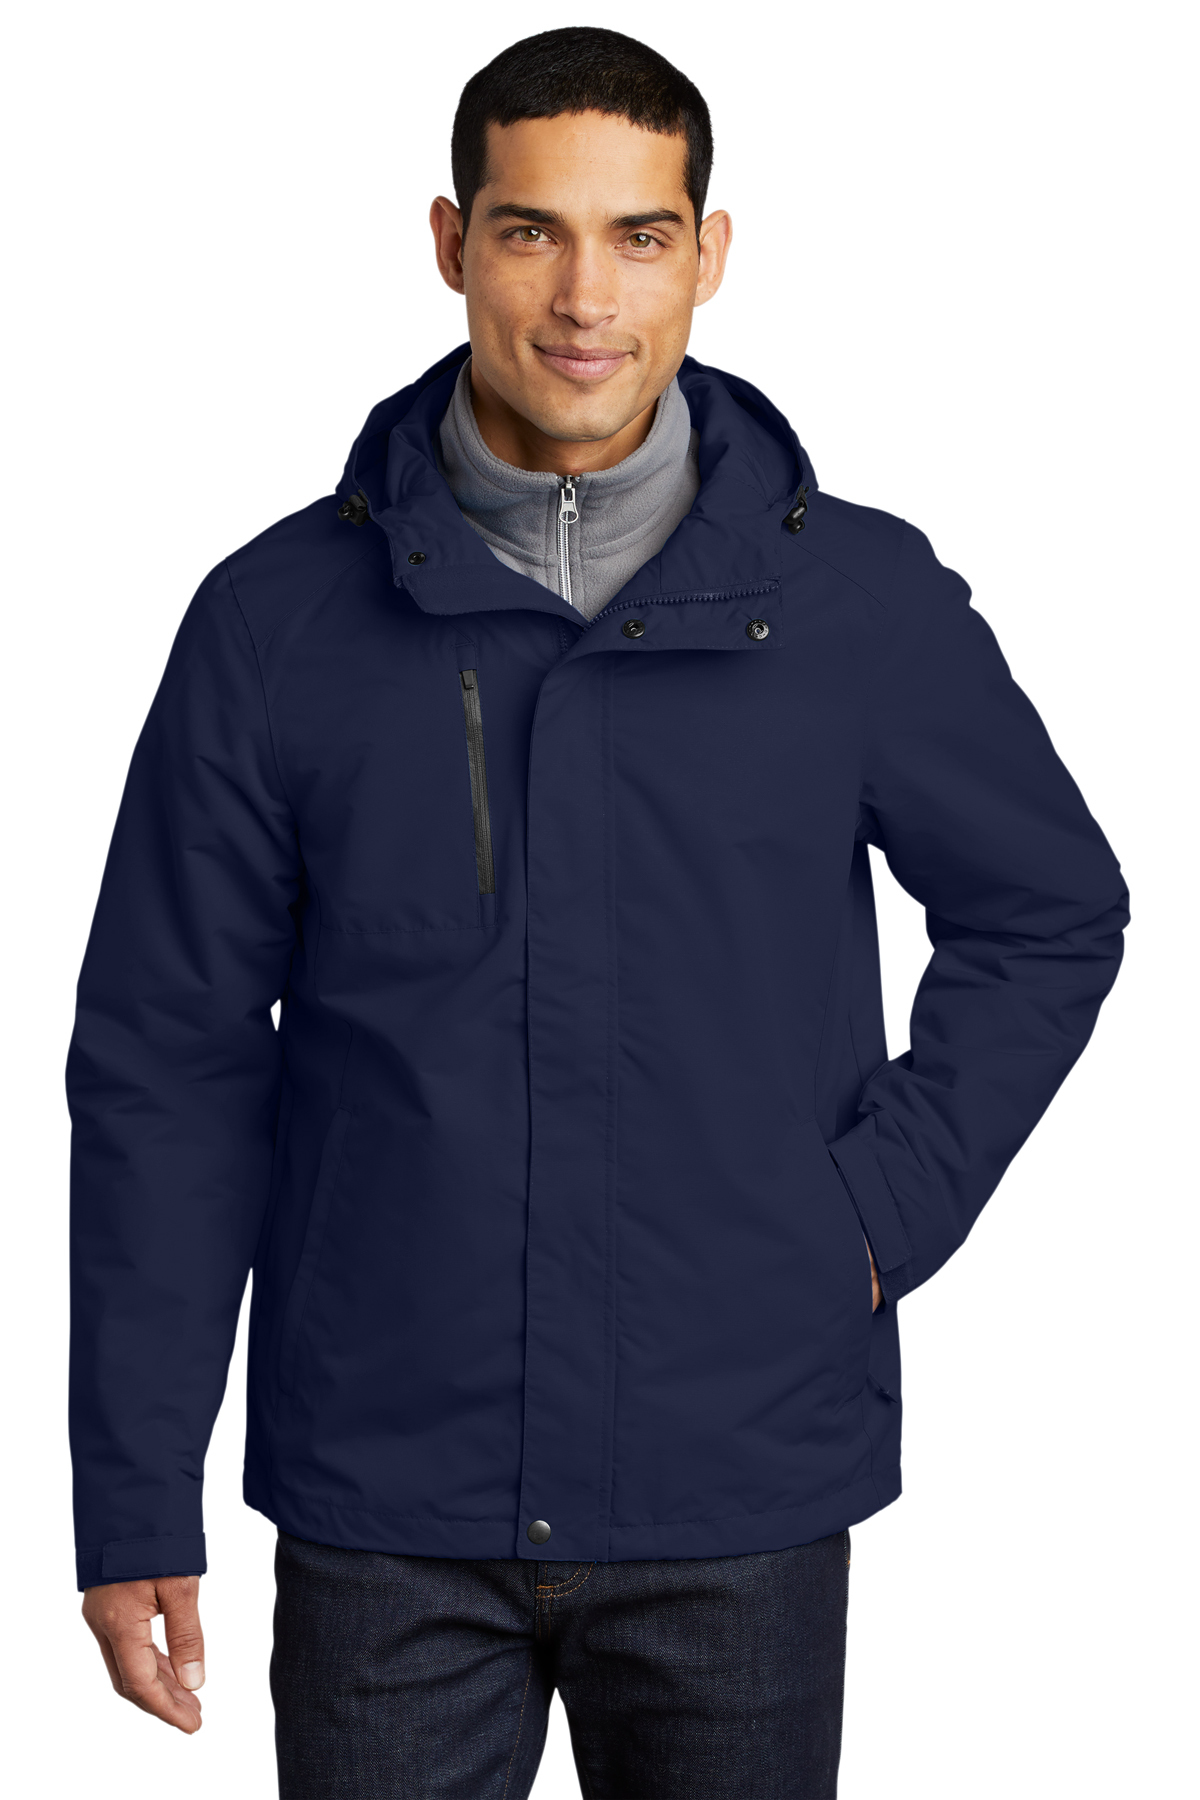 Port Authority All-Conditions Jacket | Product | SanMar